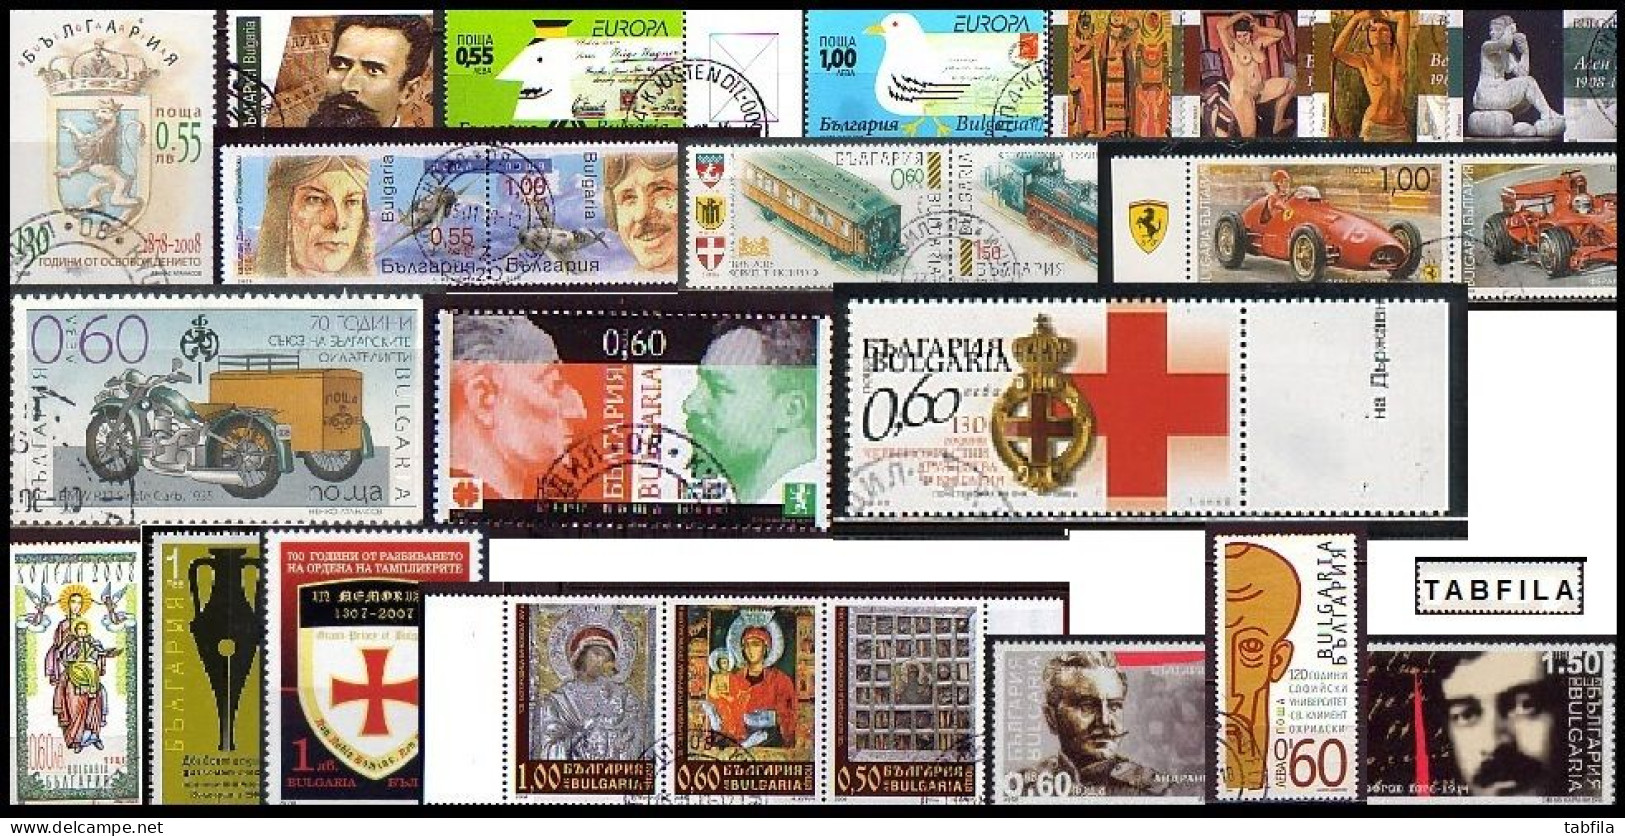 BULGARIA - 2008 - Comp. Used - 26St + 7 SS (o) - Used Stamps